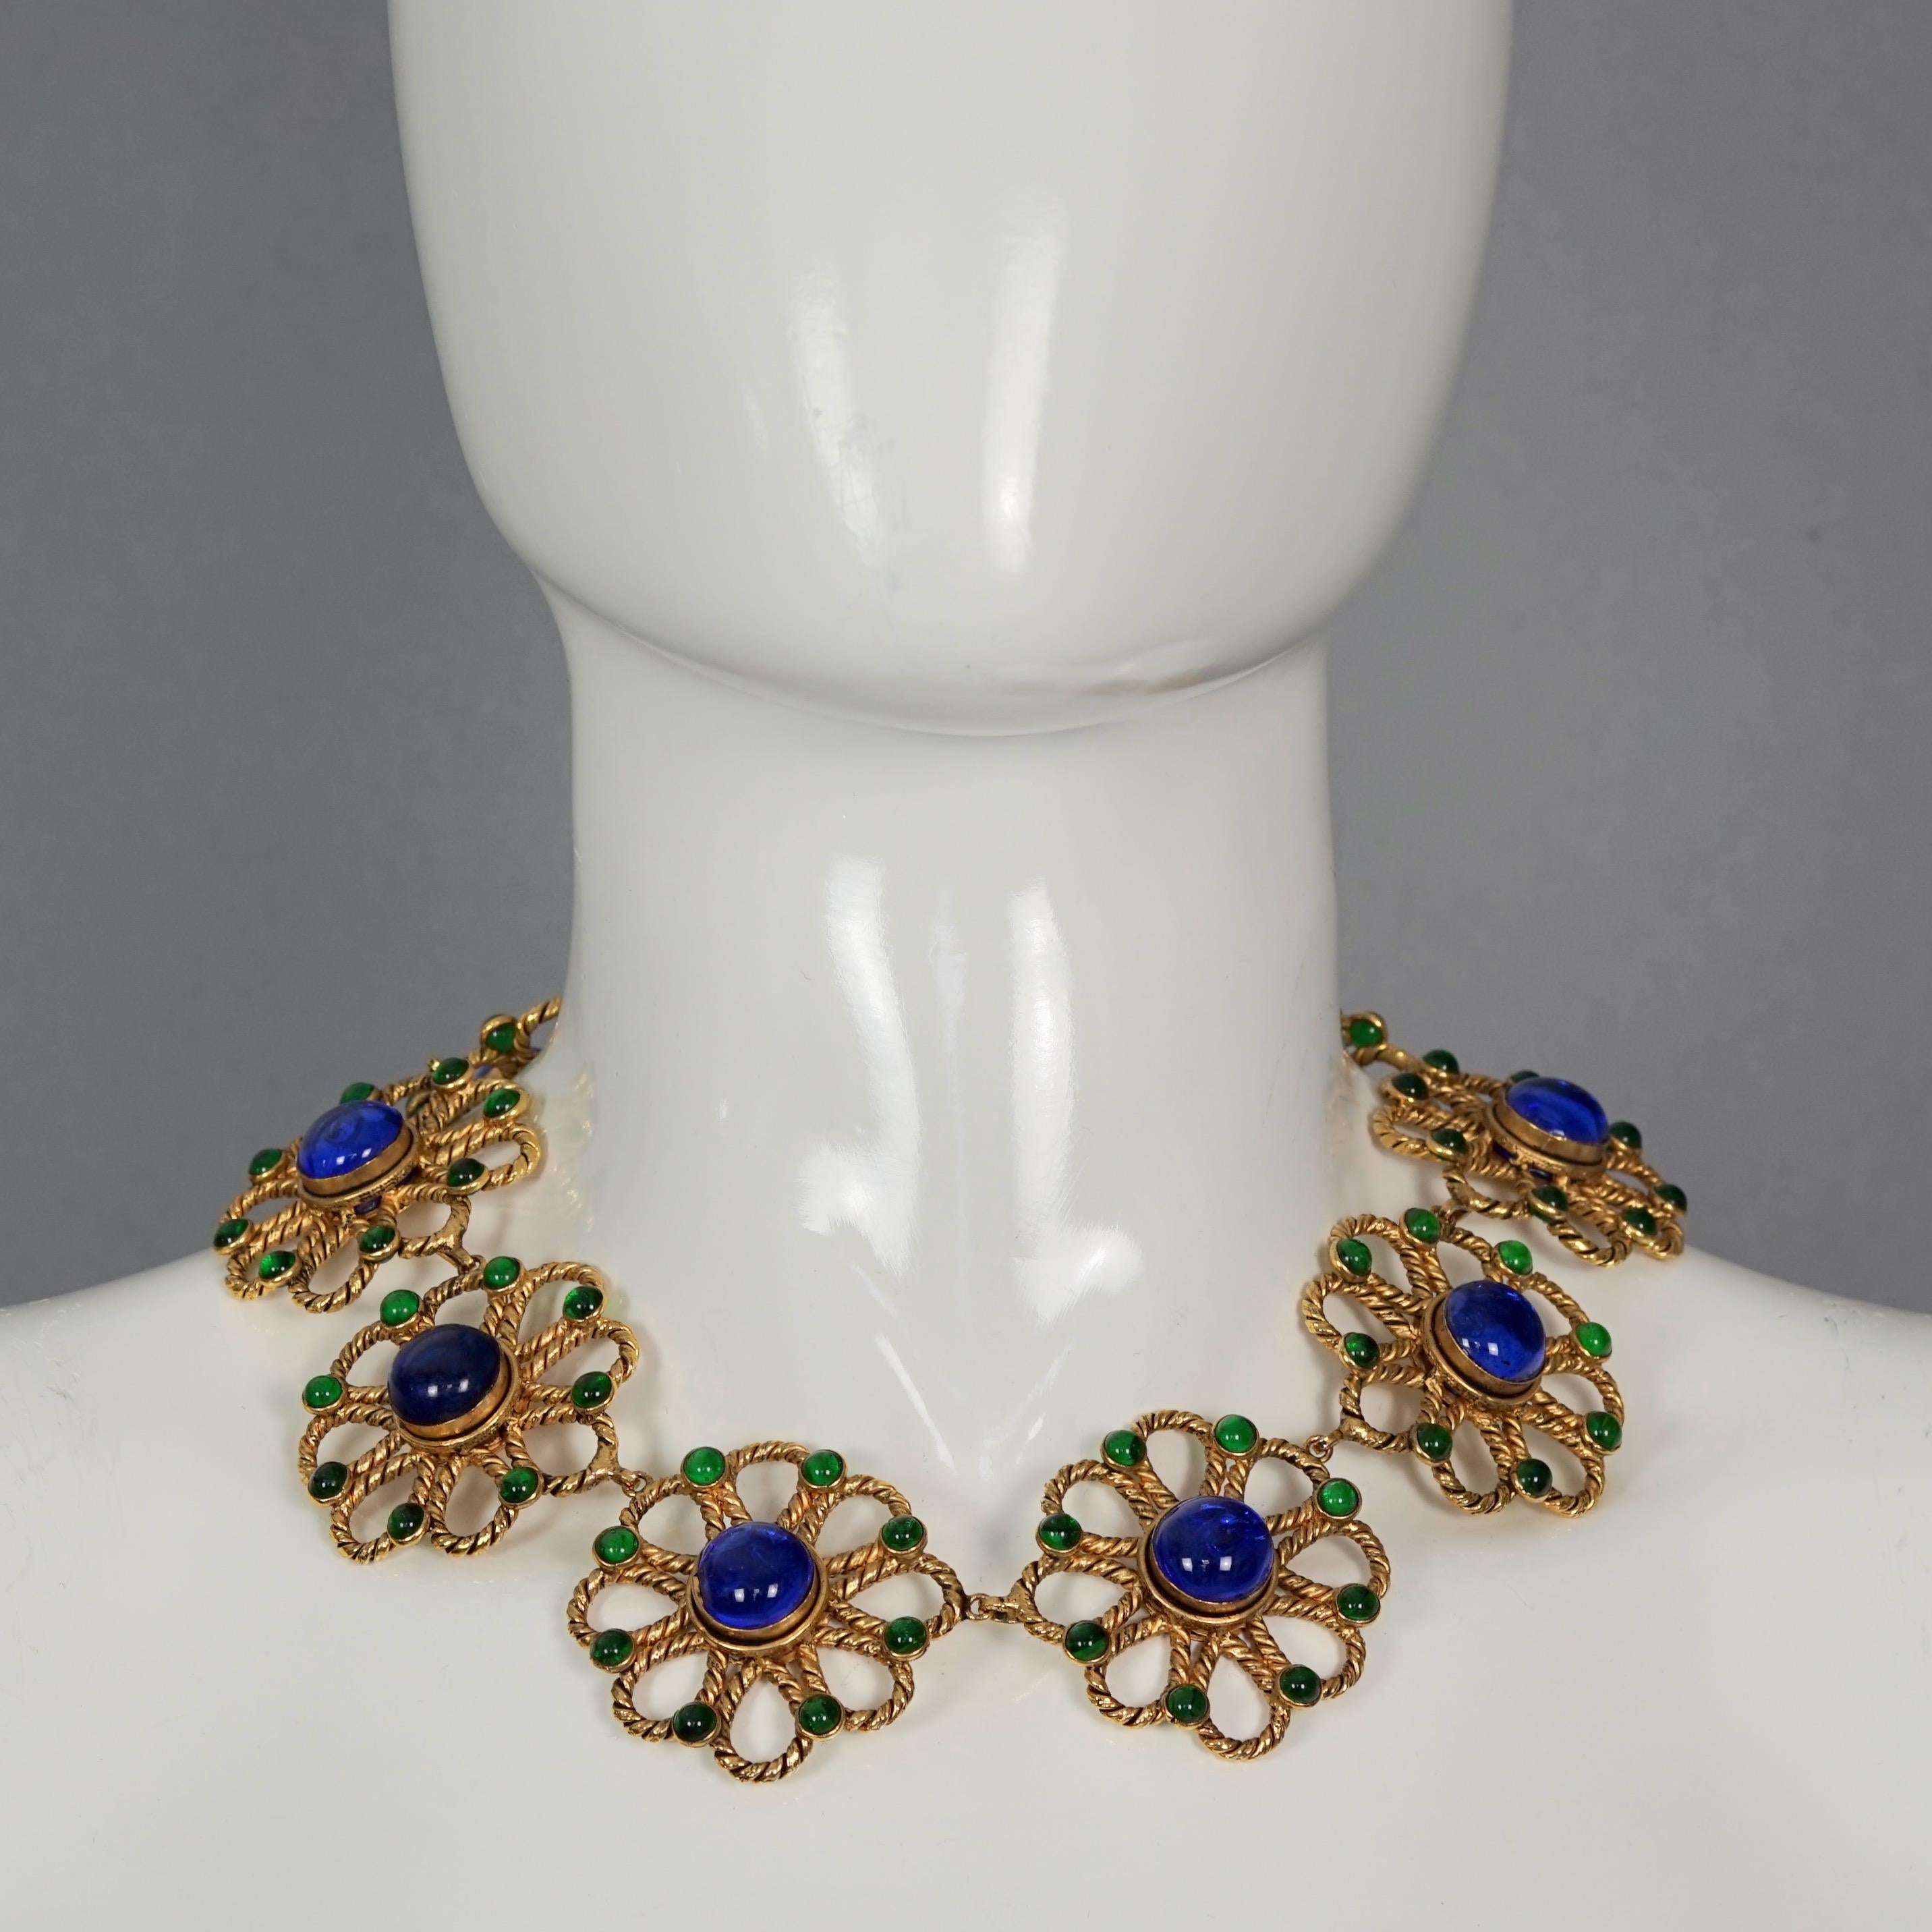 Vintage 1995 CHANEL MAISON GRIPOIX Poured Glass Torsade Flower Necklace

Measurements:
Height: 1.81 inches (4.6 cm)
Wearable Length: 15.94 inches to 17.71 inches (40.5 cm to 45 cm)

Features:
- 100% Authentic CHANEL by MAISON GRIPOIX.
- Iconic green